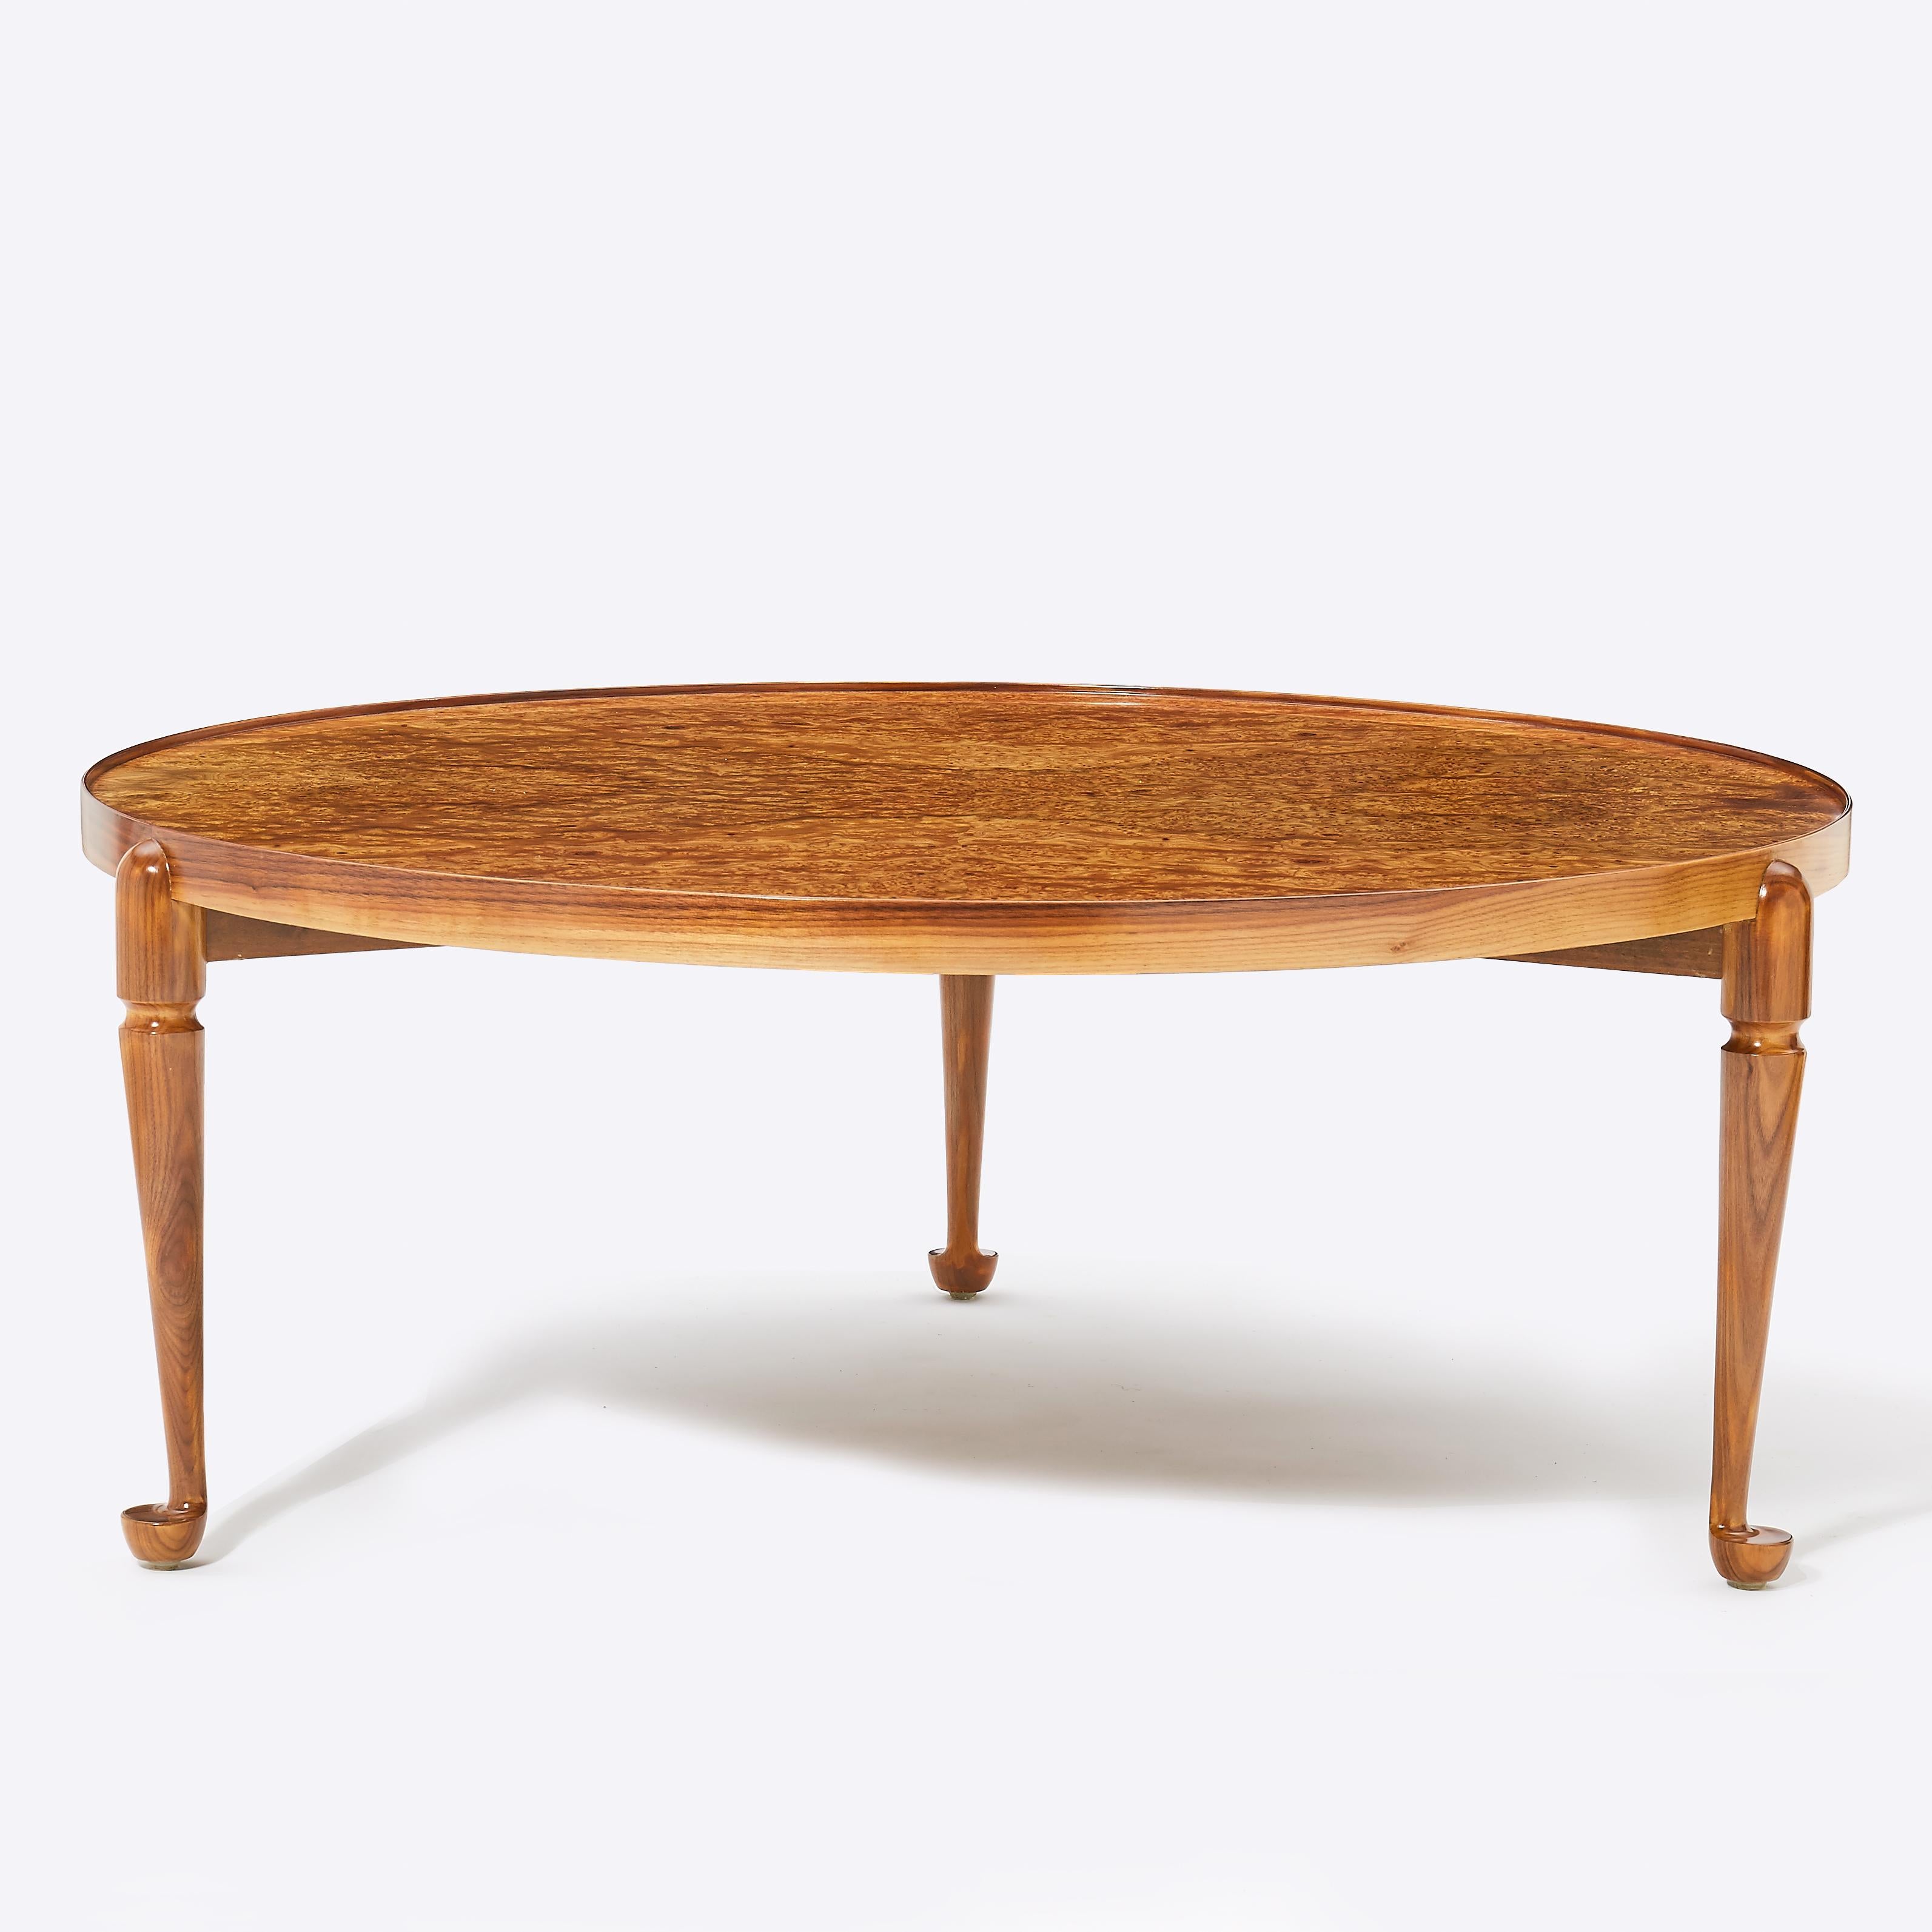 Very beautiful Josef Frank coffee table with a rare burl wood top in excellent condition. Very vibrant wood color and no fading. Originally designed in 1952, this model is from the 1980s and manufactured by Eriksson & Söners Möbelsnickeri Vrena,